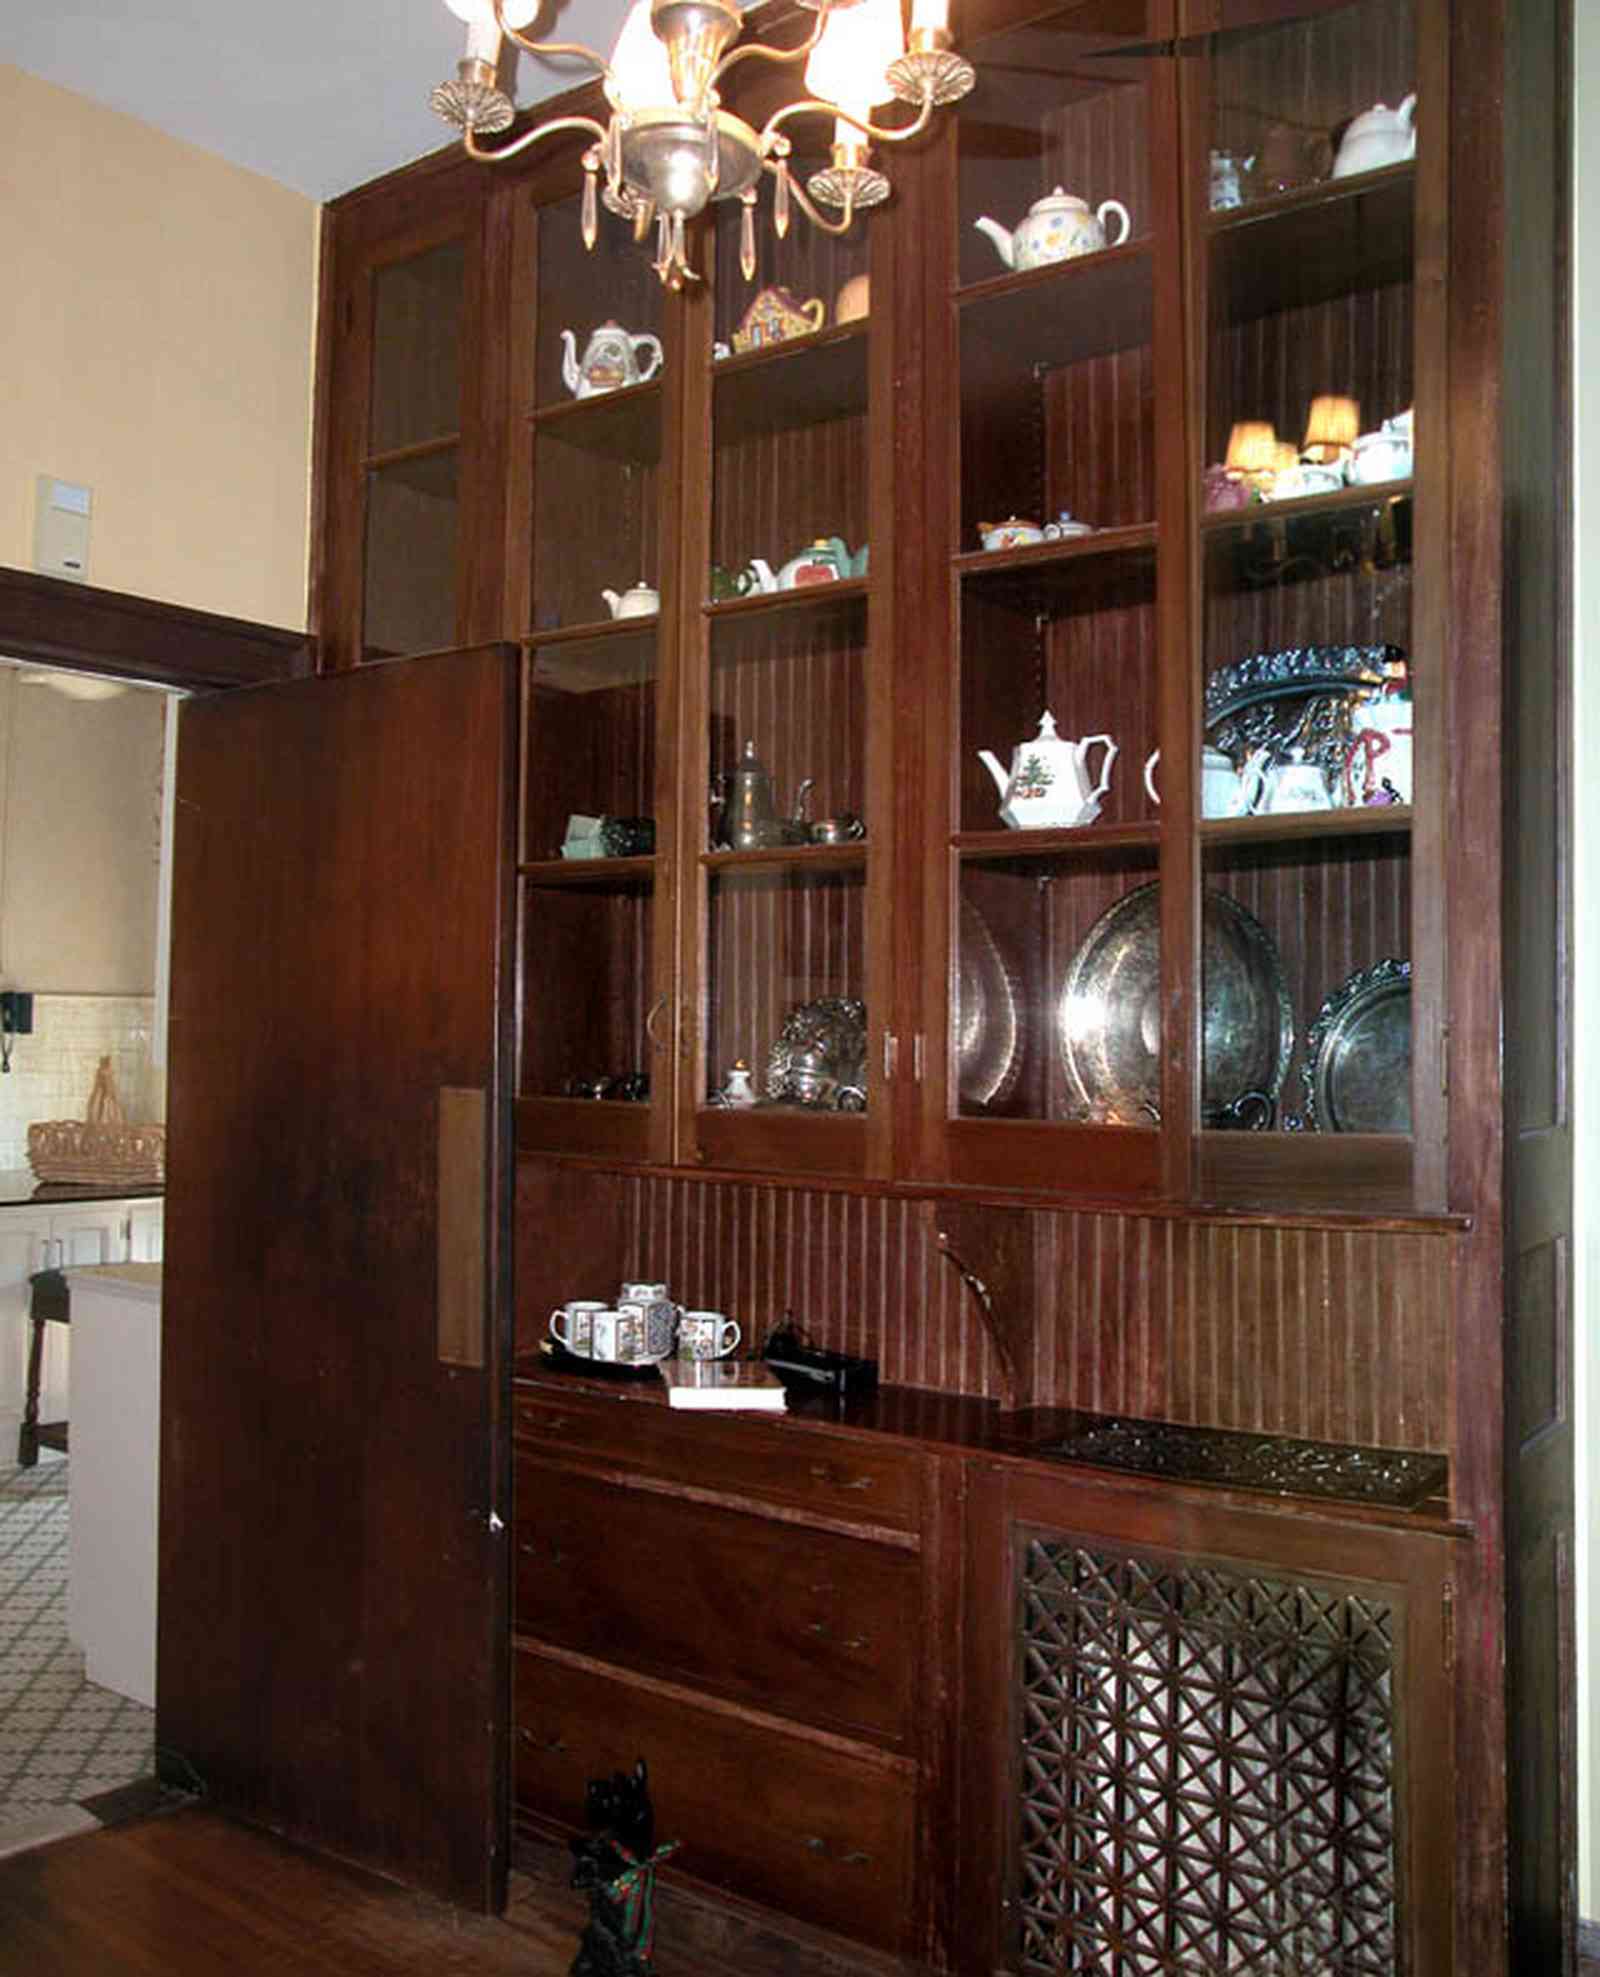 North-Hill:-105-West-Gonzales-Street_40.jpg:  china cabinet, silver platters, radiator, butlers pantry, kitchen